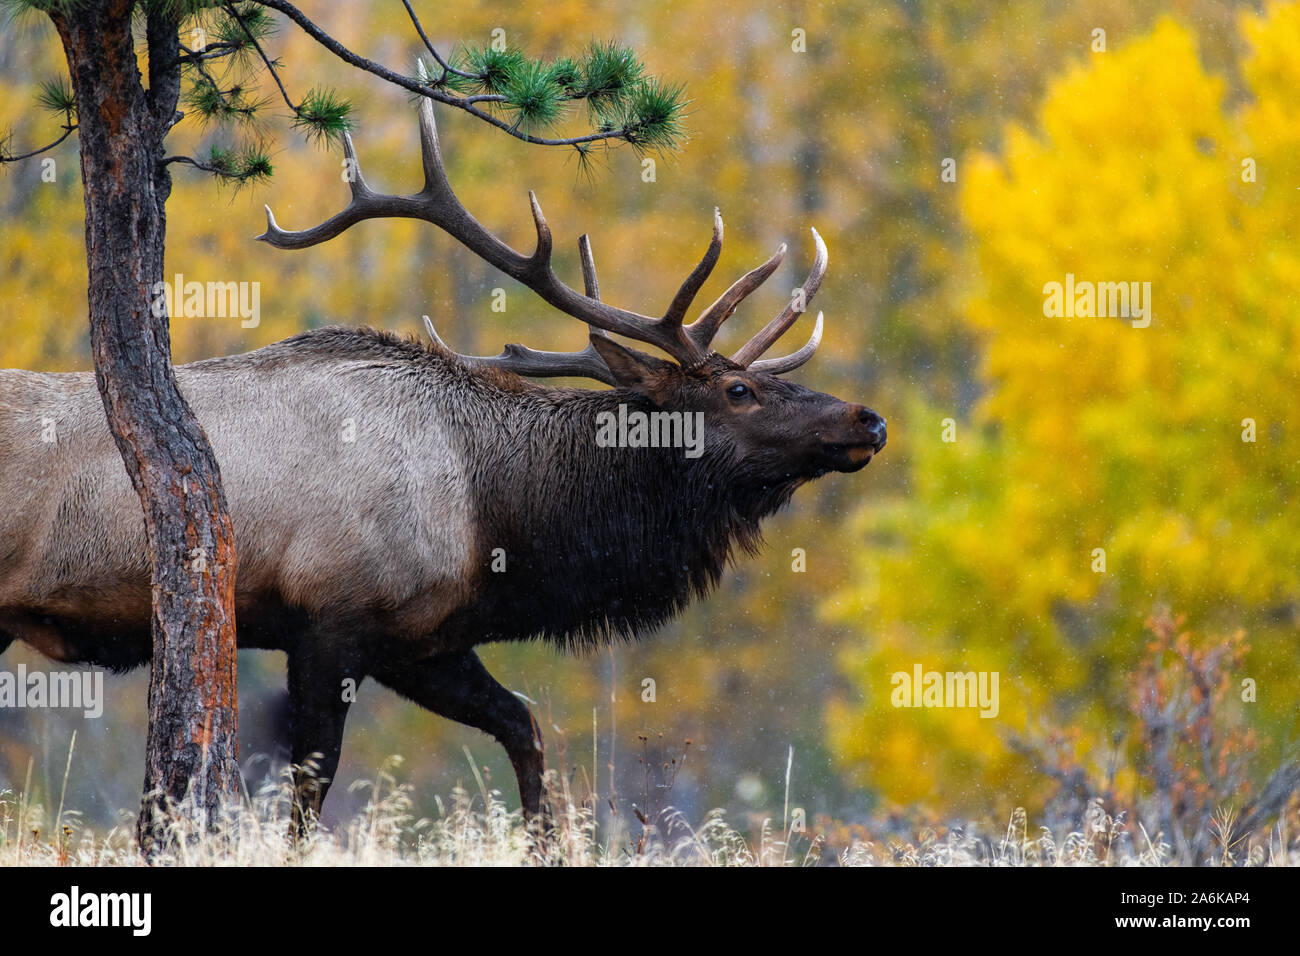 A Large Bull Elk Roaming the Forest in Autumn Stock Photo